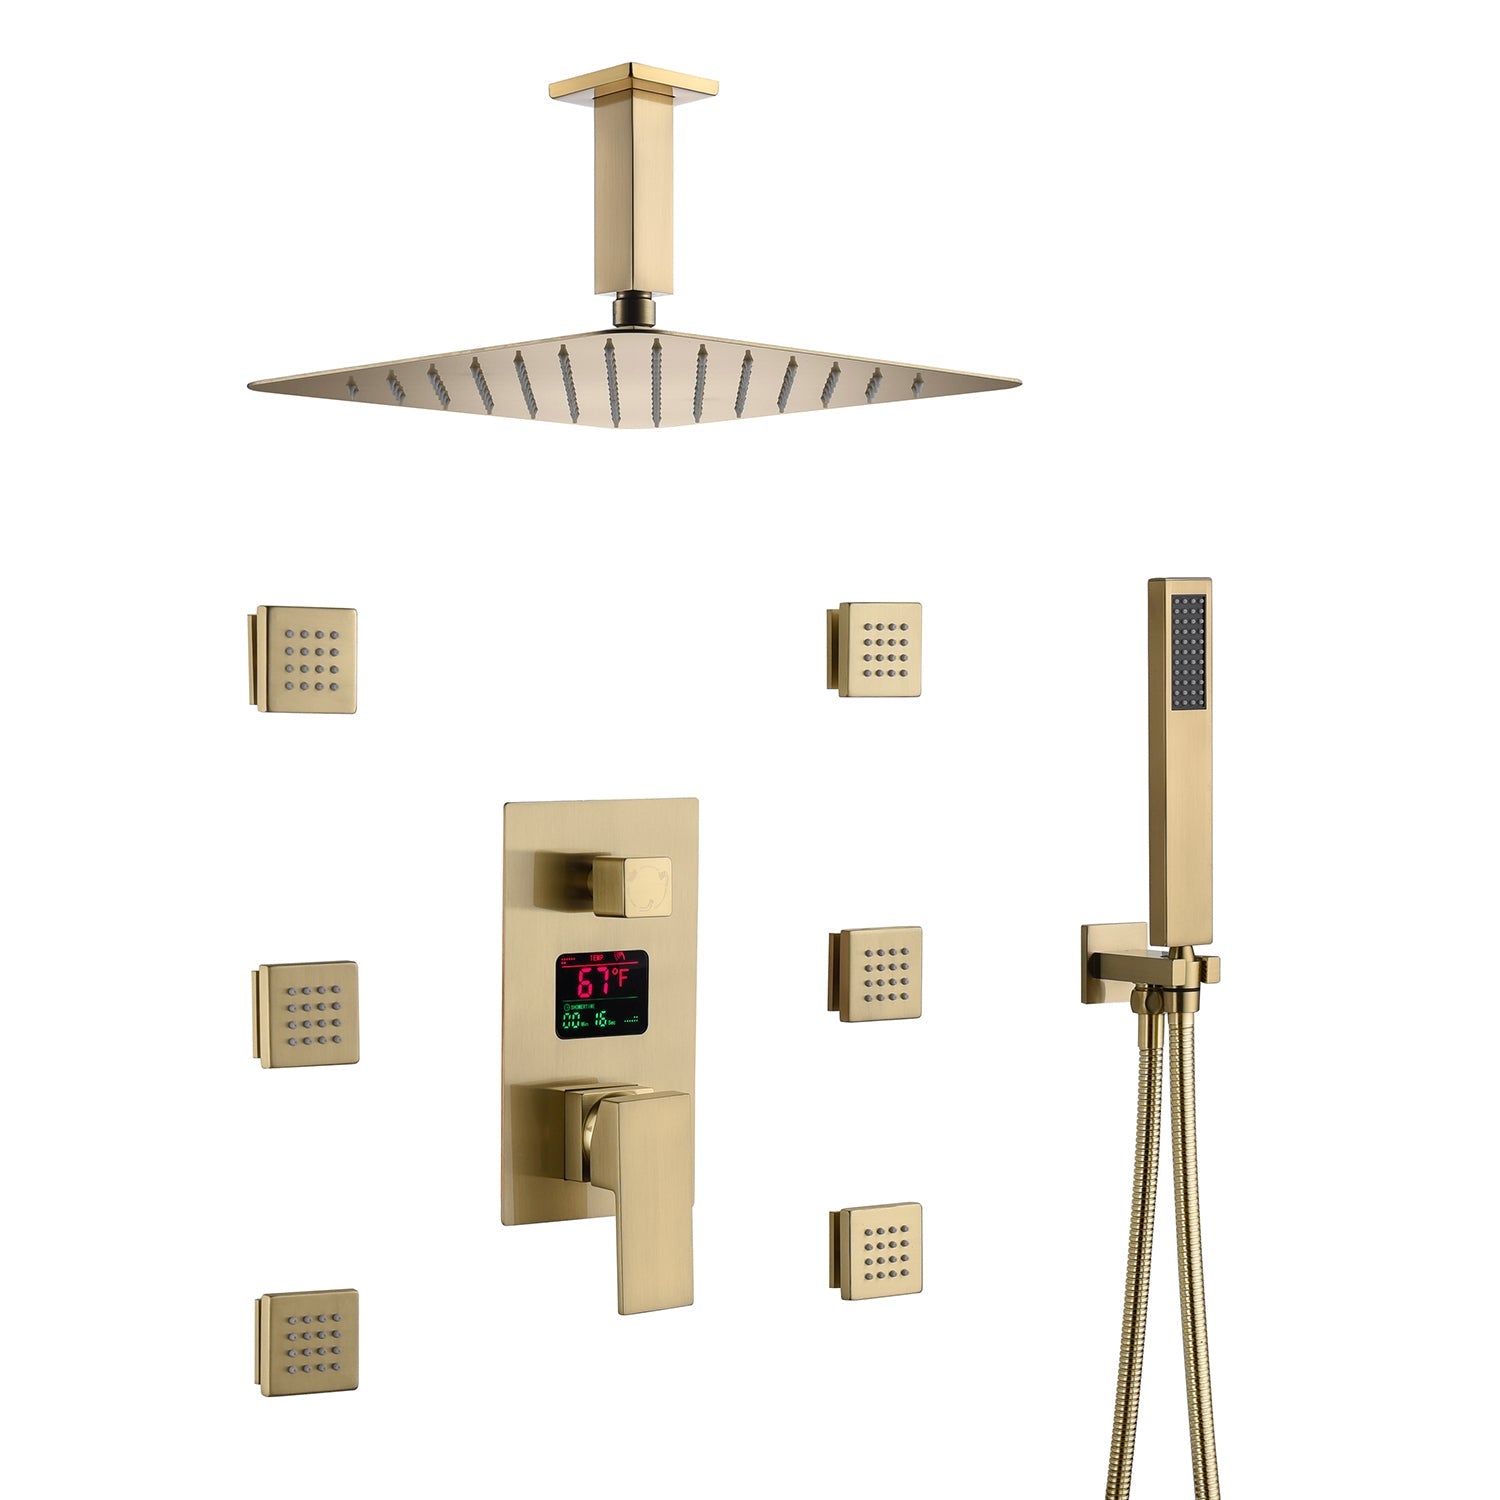 12-Inch or 16-Inch Brushed Gold Ceiling-Mounted Shower System - Features 3-Way Digital Display Anti-Scald Valve & Includes 6 Body Jets